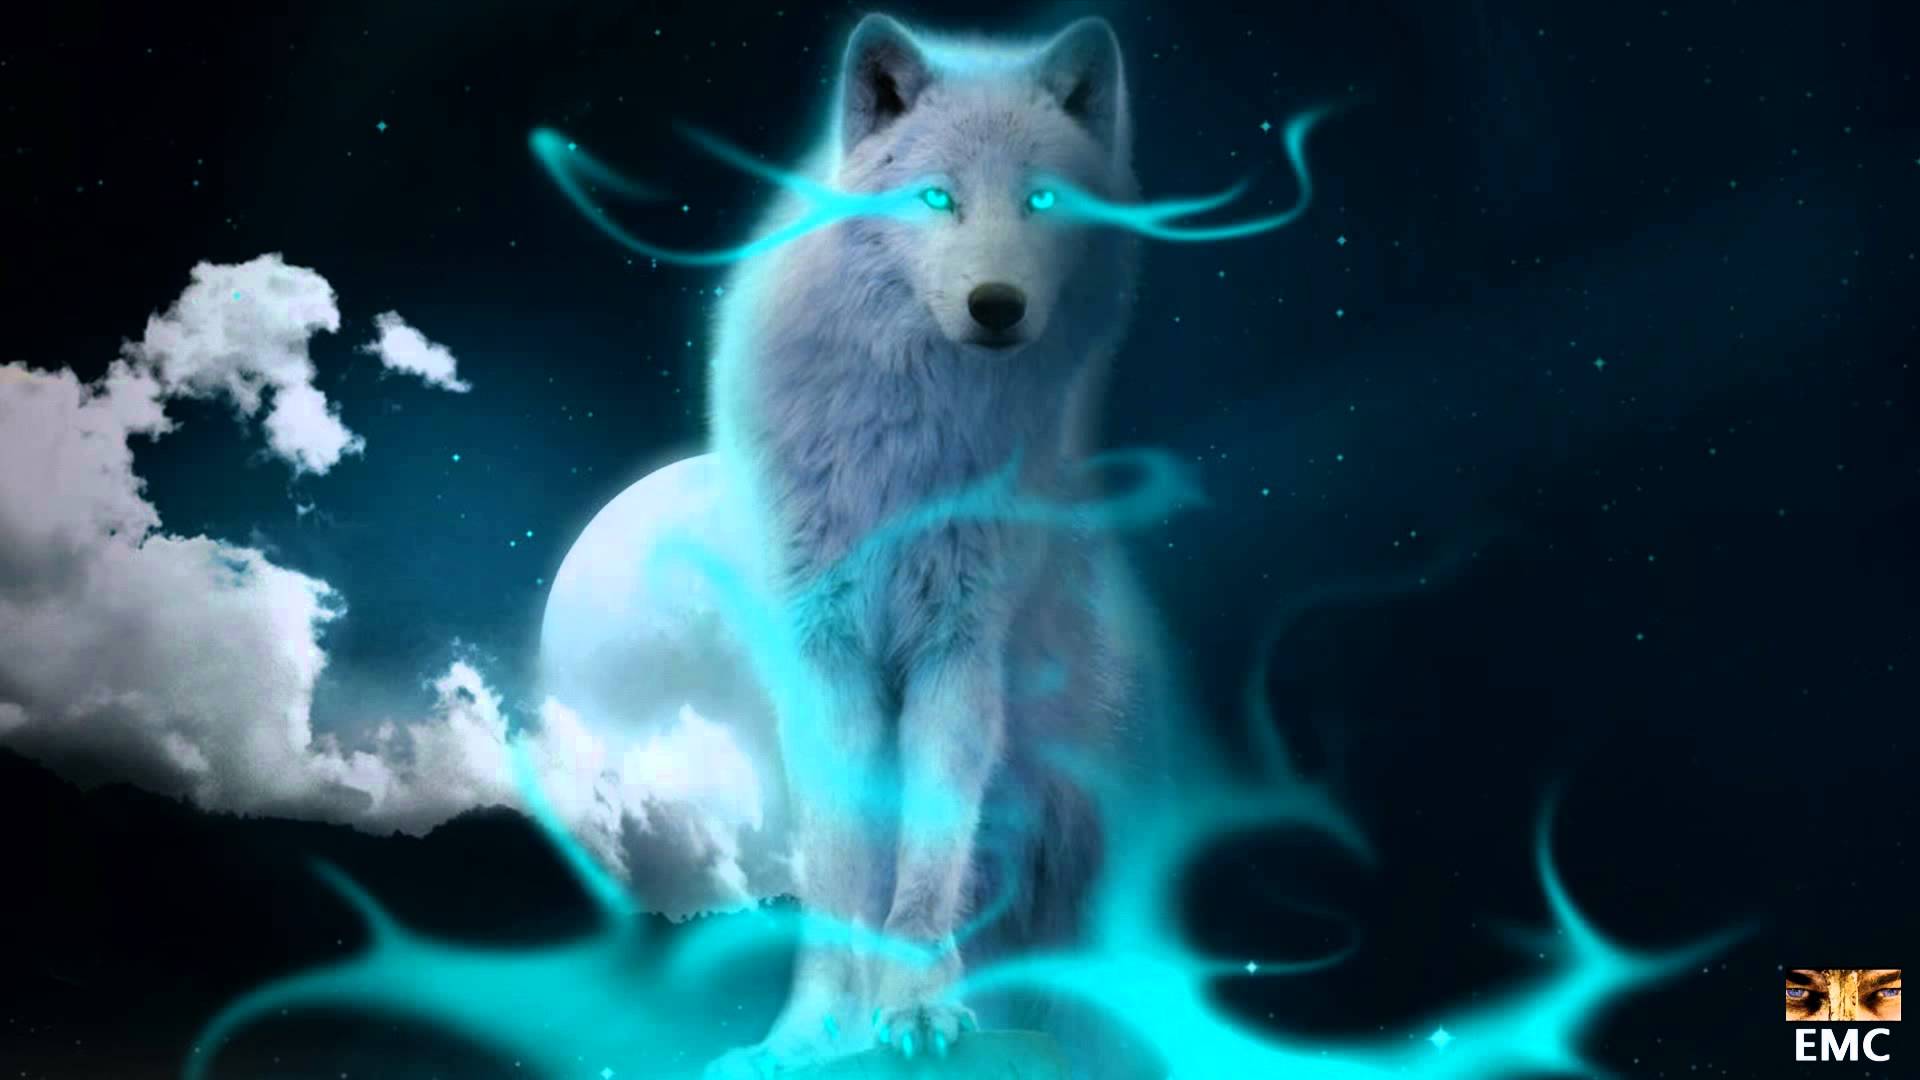 170 Fantasy Wolf HD Wallpapers and Backgrounds